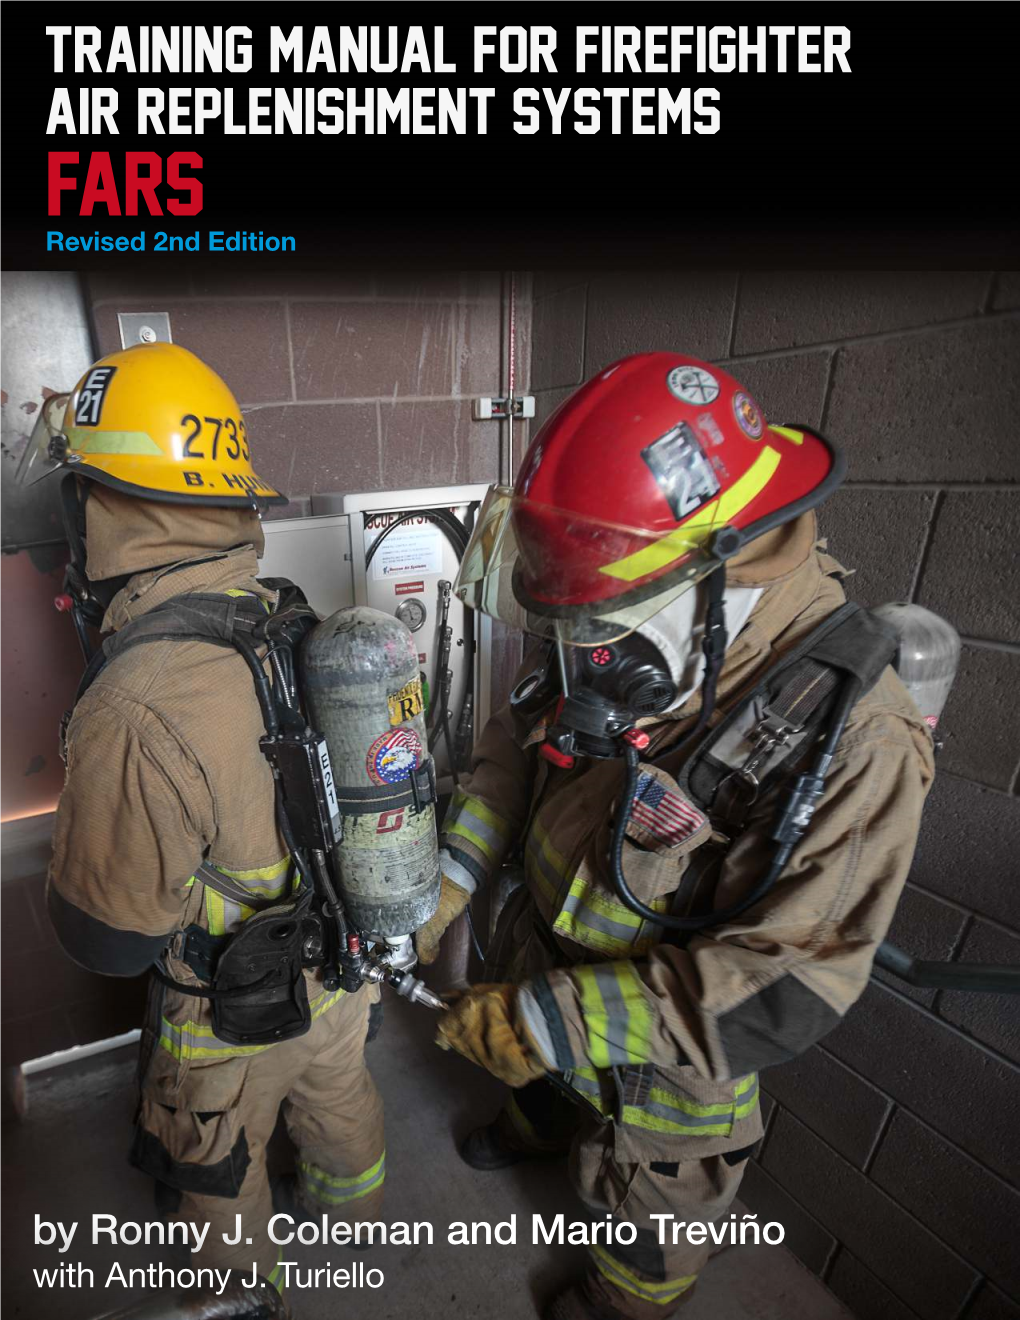 Training Manual for Firefighter Air Replenishment Systems Second